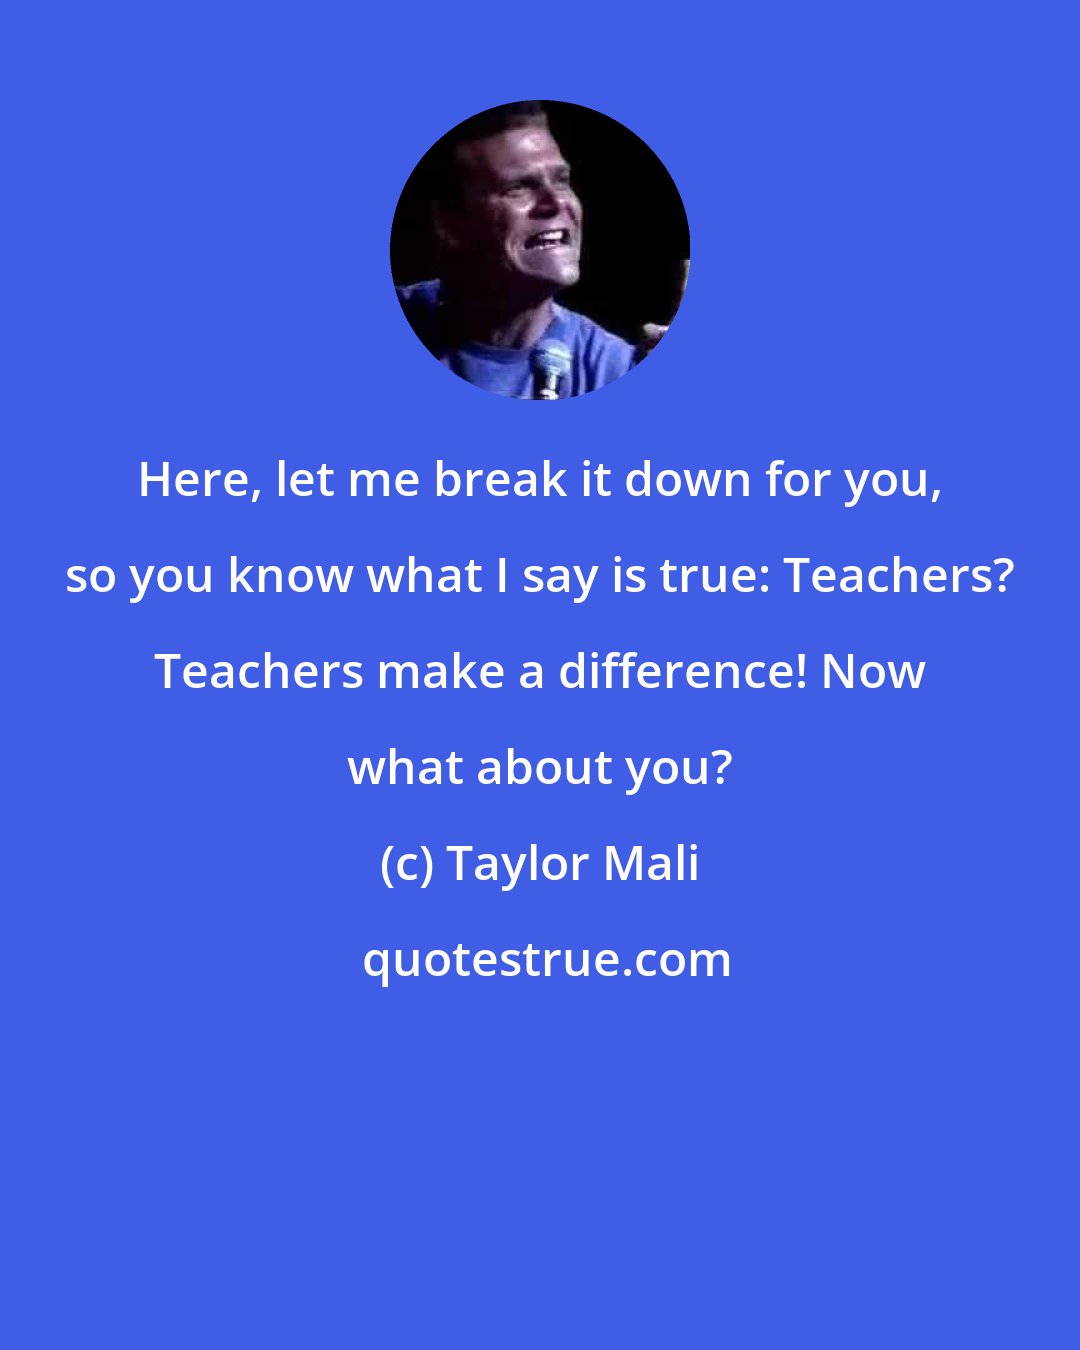 Taylor Mali: Here, let me break it down for you, so you know what I say is true: Teachers? Teachers make a difference! Now what about you?